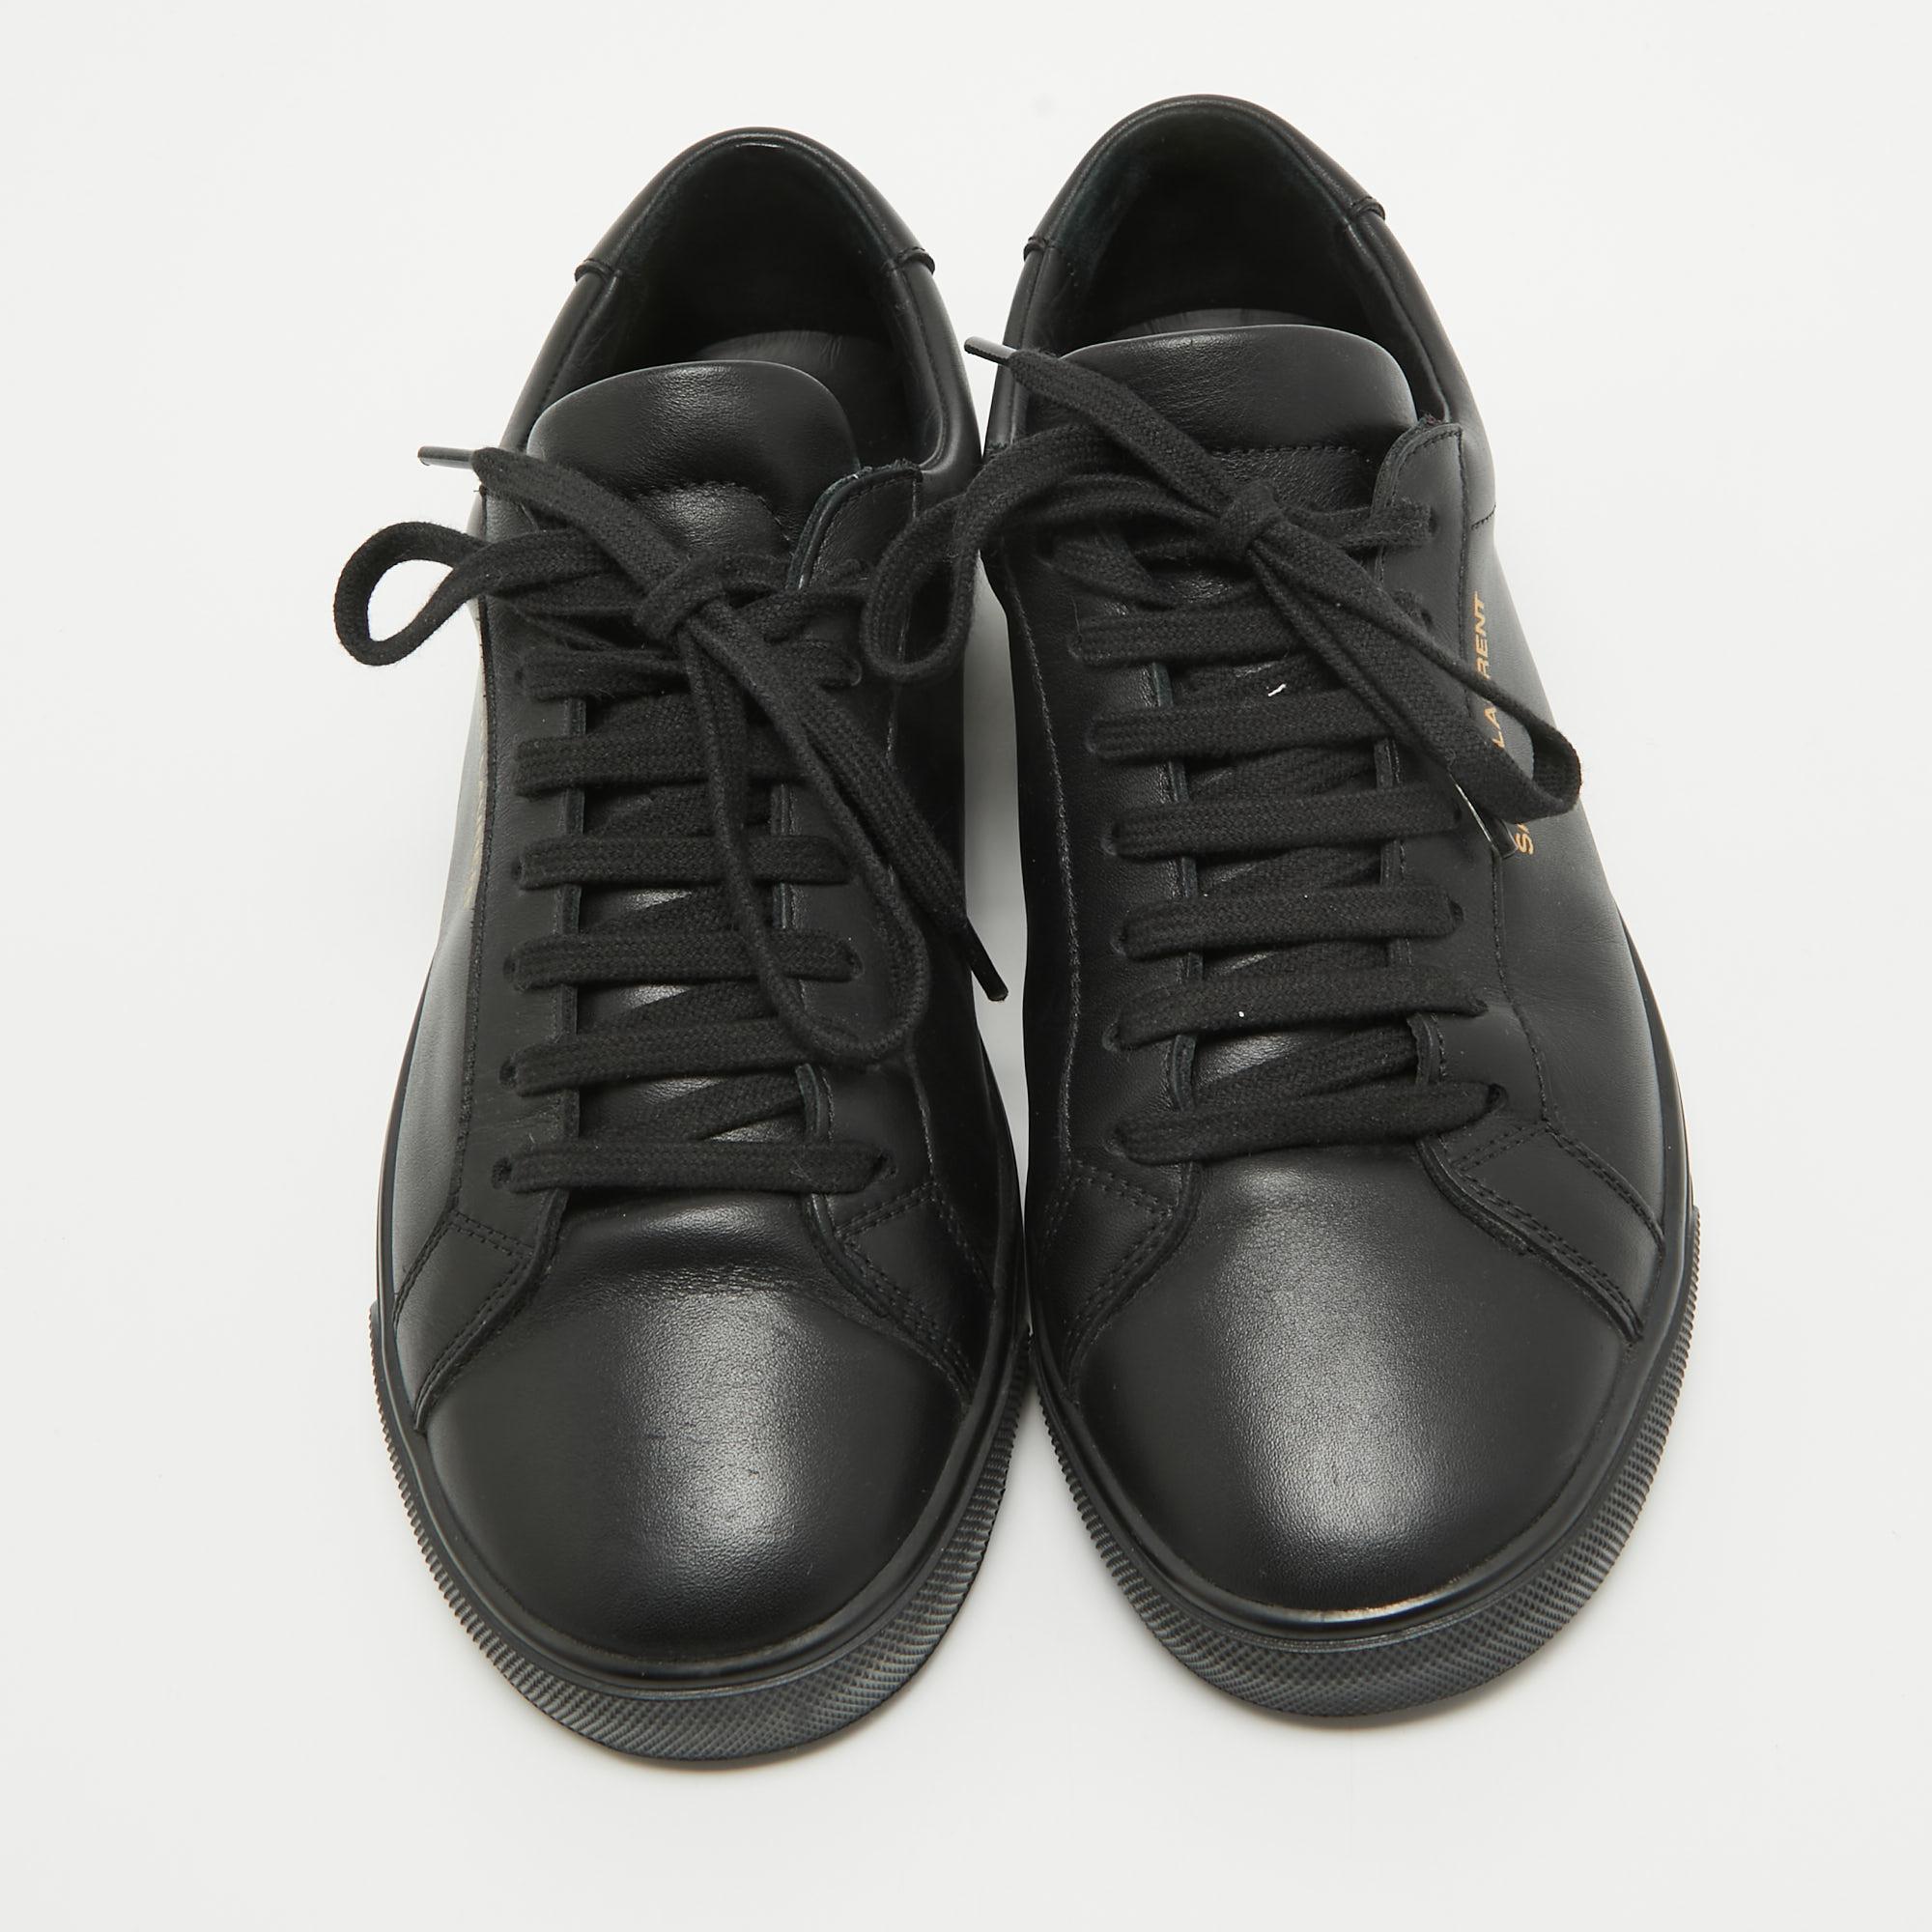 Step into fashion-forward luxury with these YSL sneakers. These premium kicks offer a harmonious blend of style and comfort, perfect for those who demand sophistication in every step.

Includes
Invoice